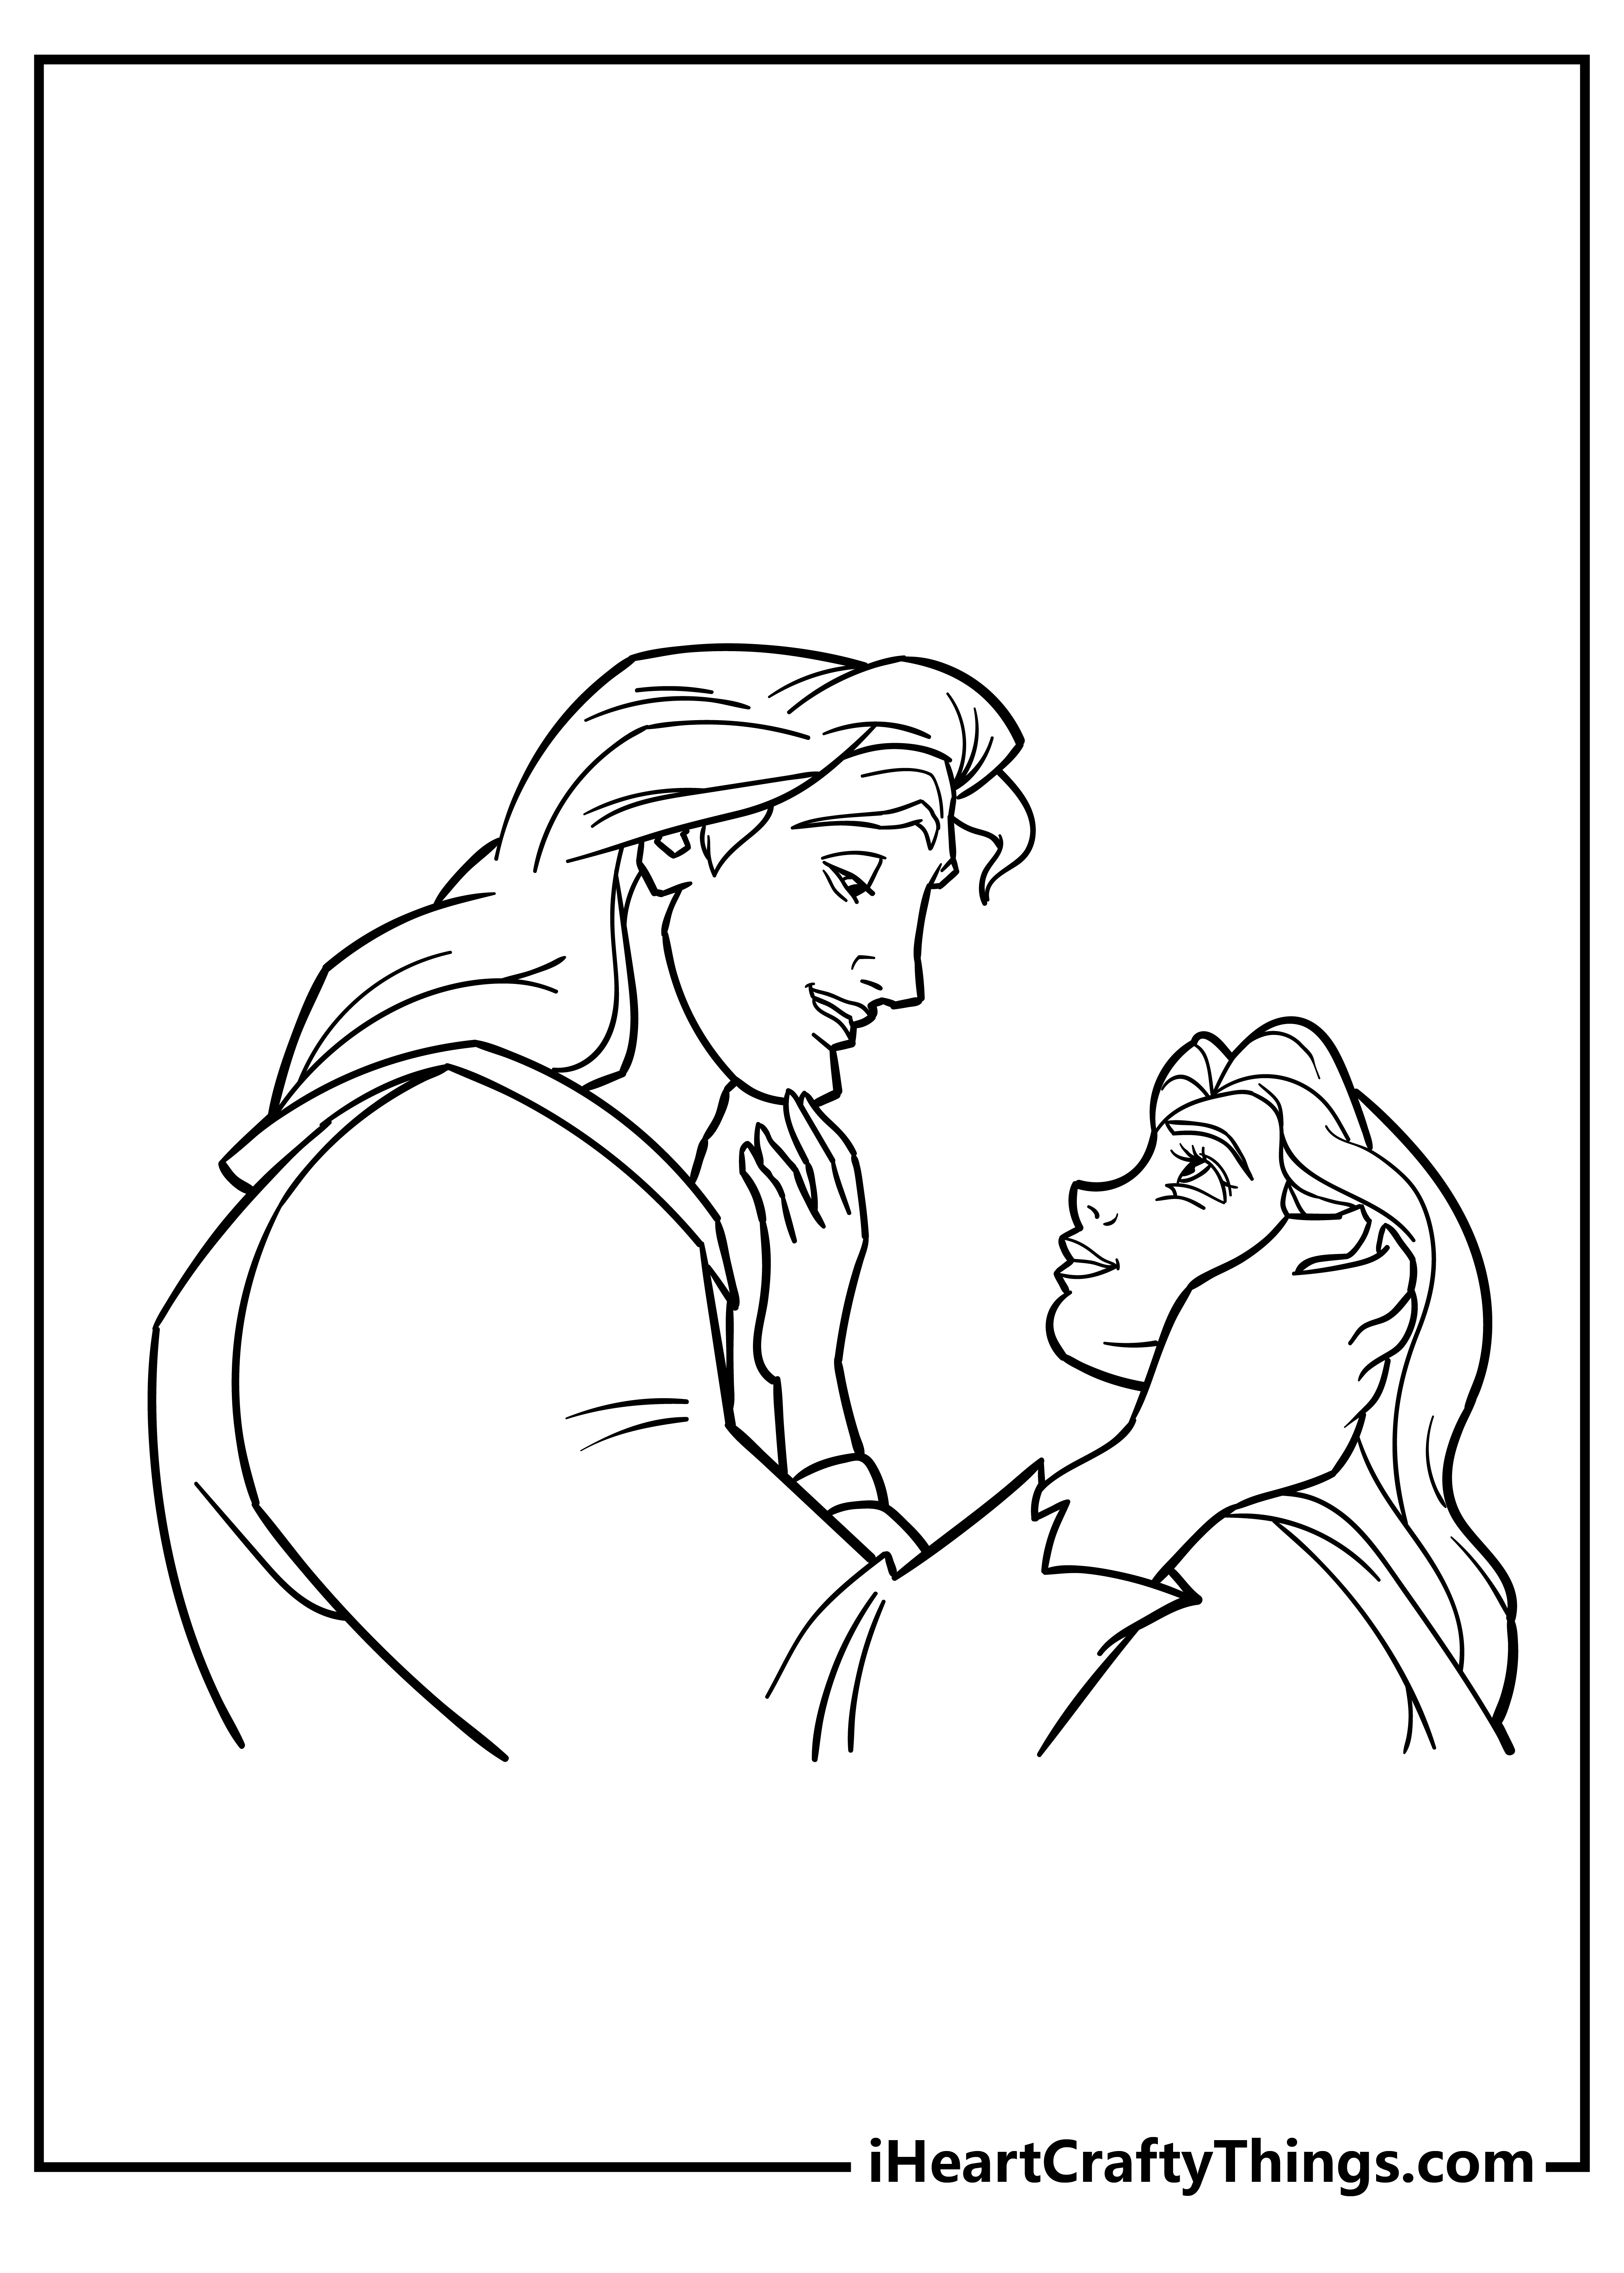 Beauty and the Beast Coloring Pages free pdf download